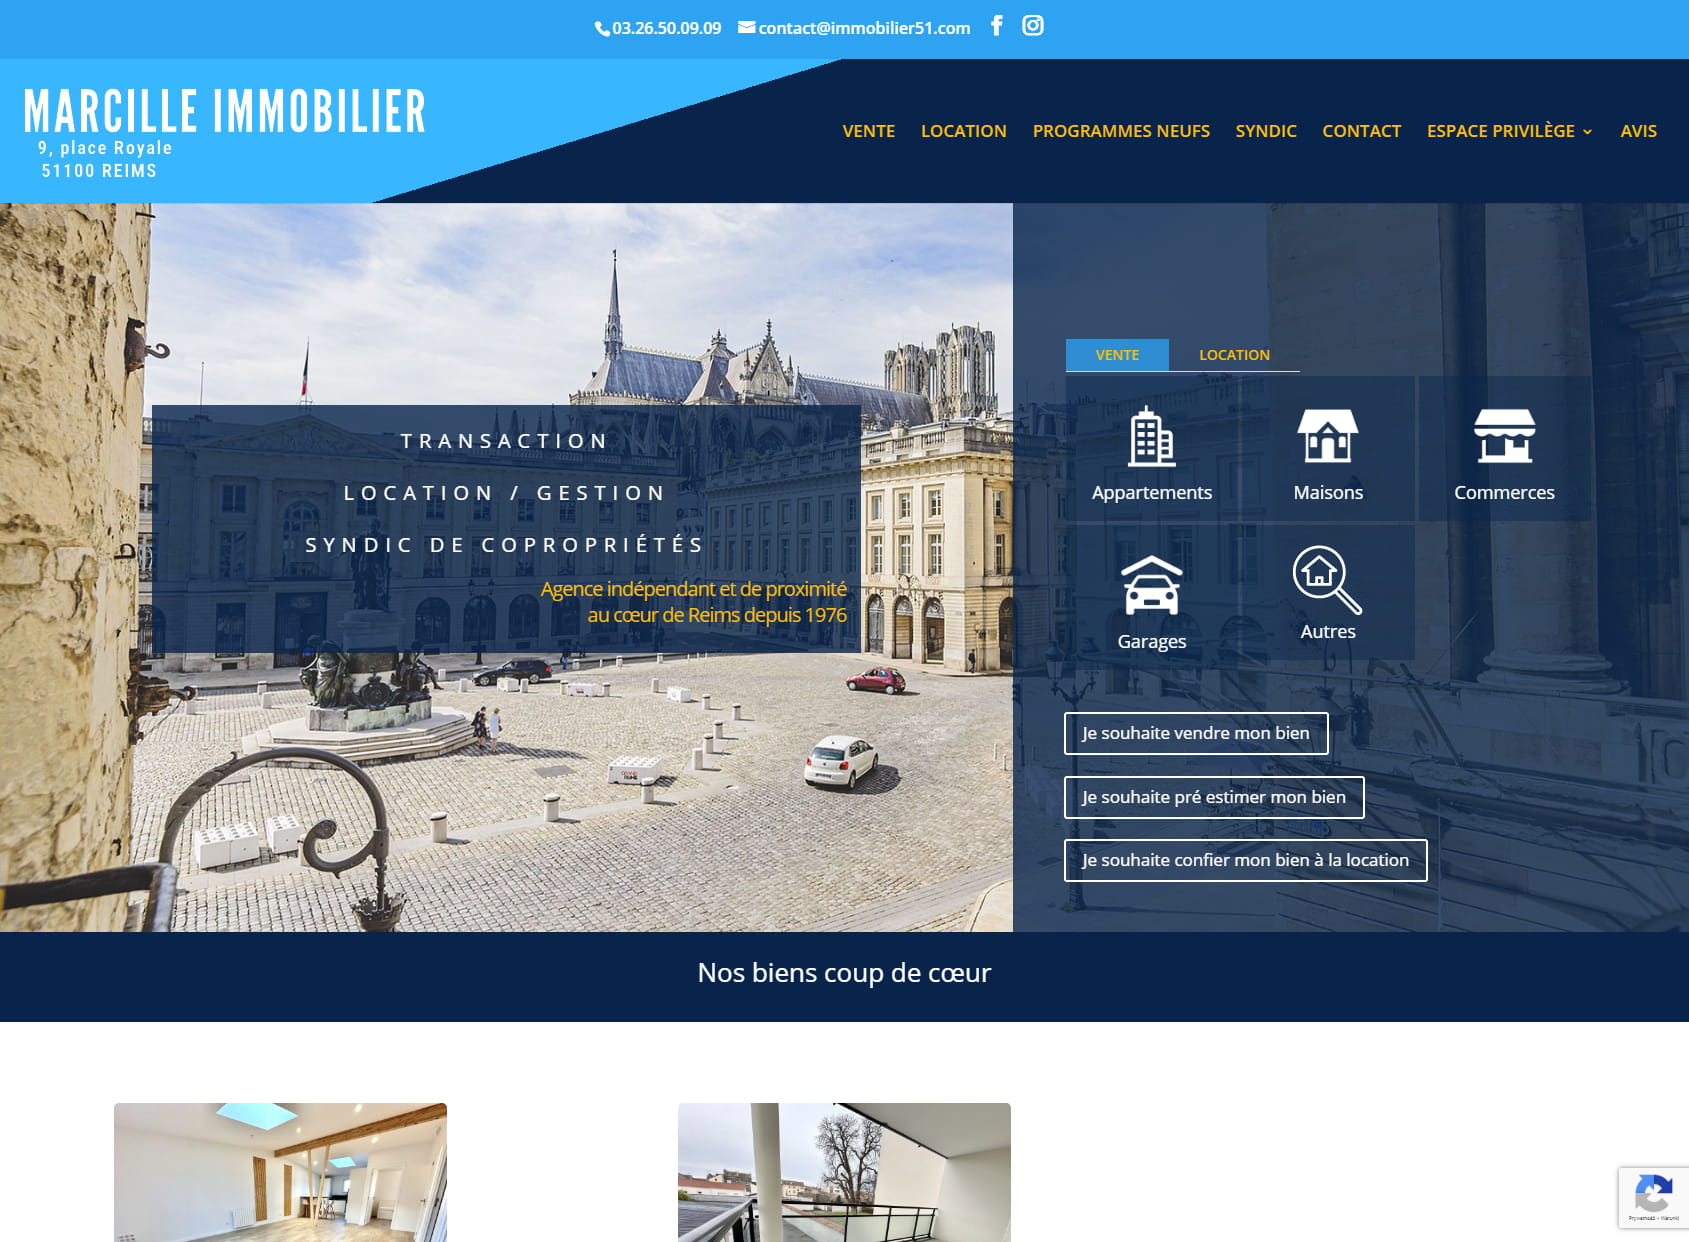 Marcille Immobilier